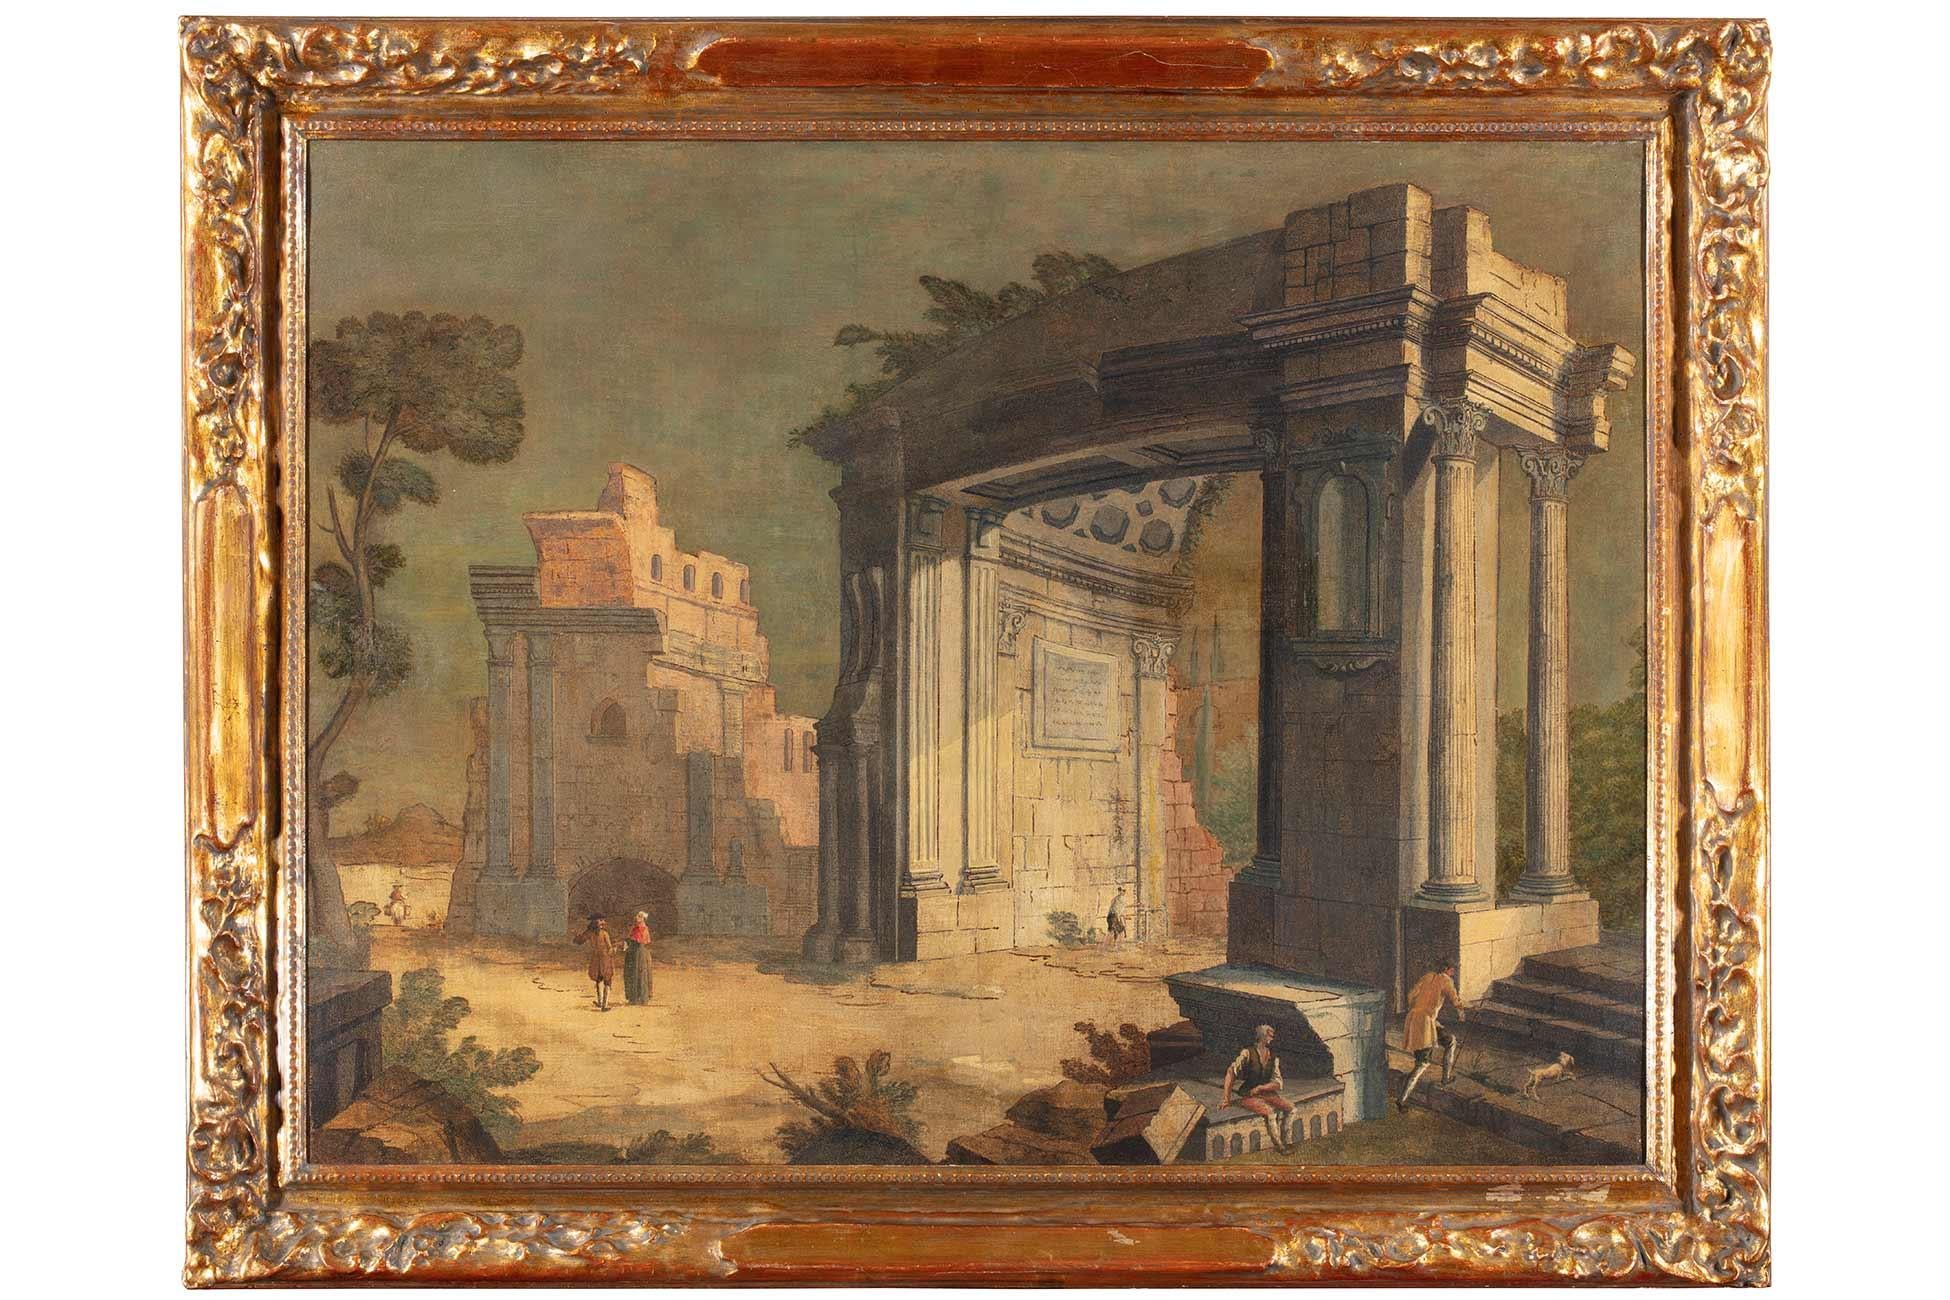 Antonio Stom (Venice c. 1688 - 1734)

Architectural Capriccio
oil on canvas, cm. 88 x 113 - with frame cm. 106 x 132

Carved, sculpted and gilded wooden frame

Expertise: Giancarlo Sestieri

An artist of Venetian origin, Antonio Stom characterised